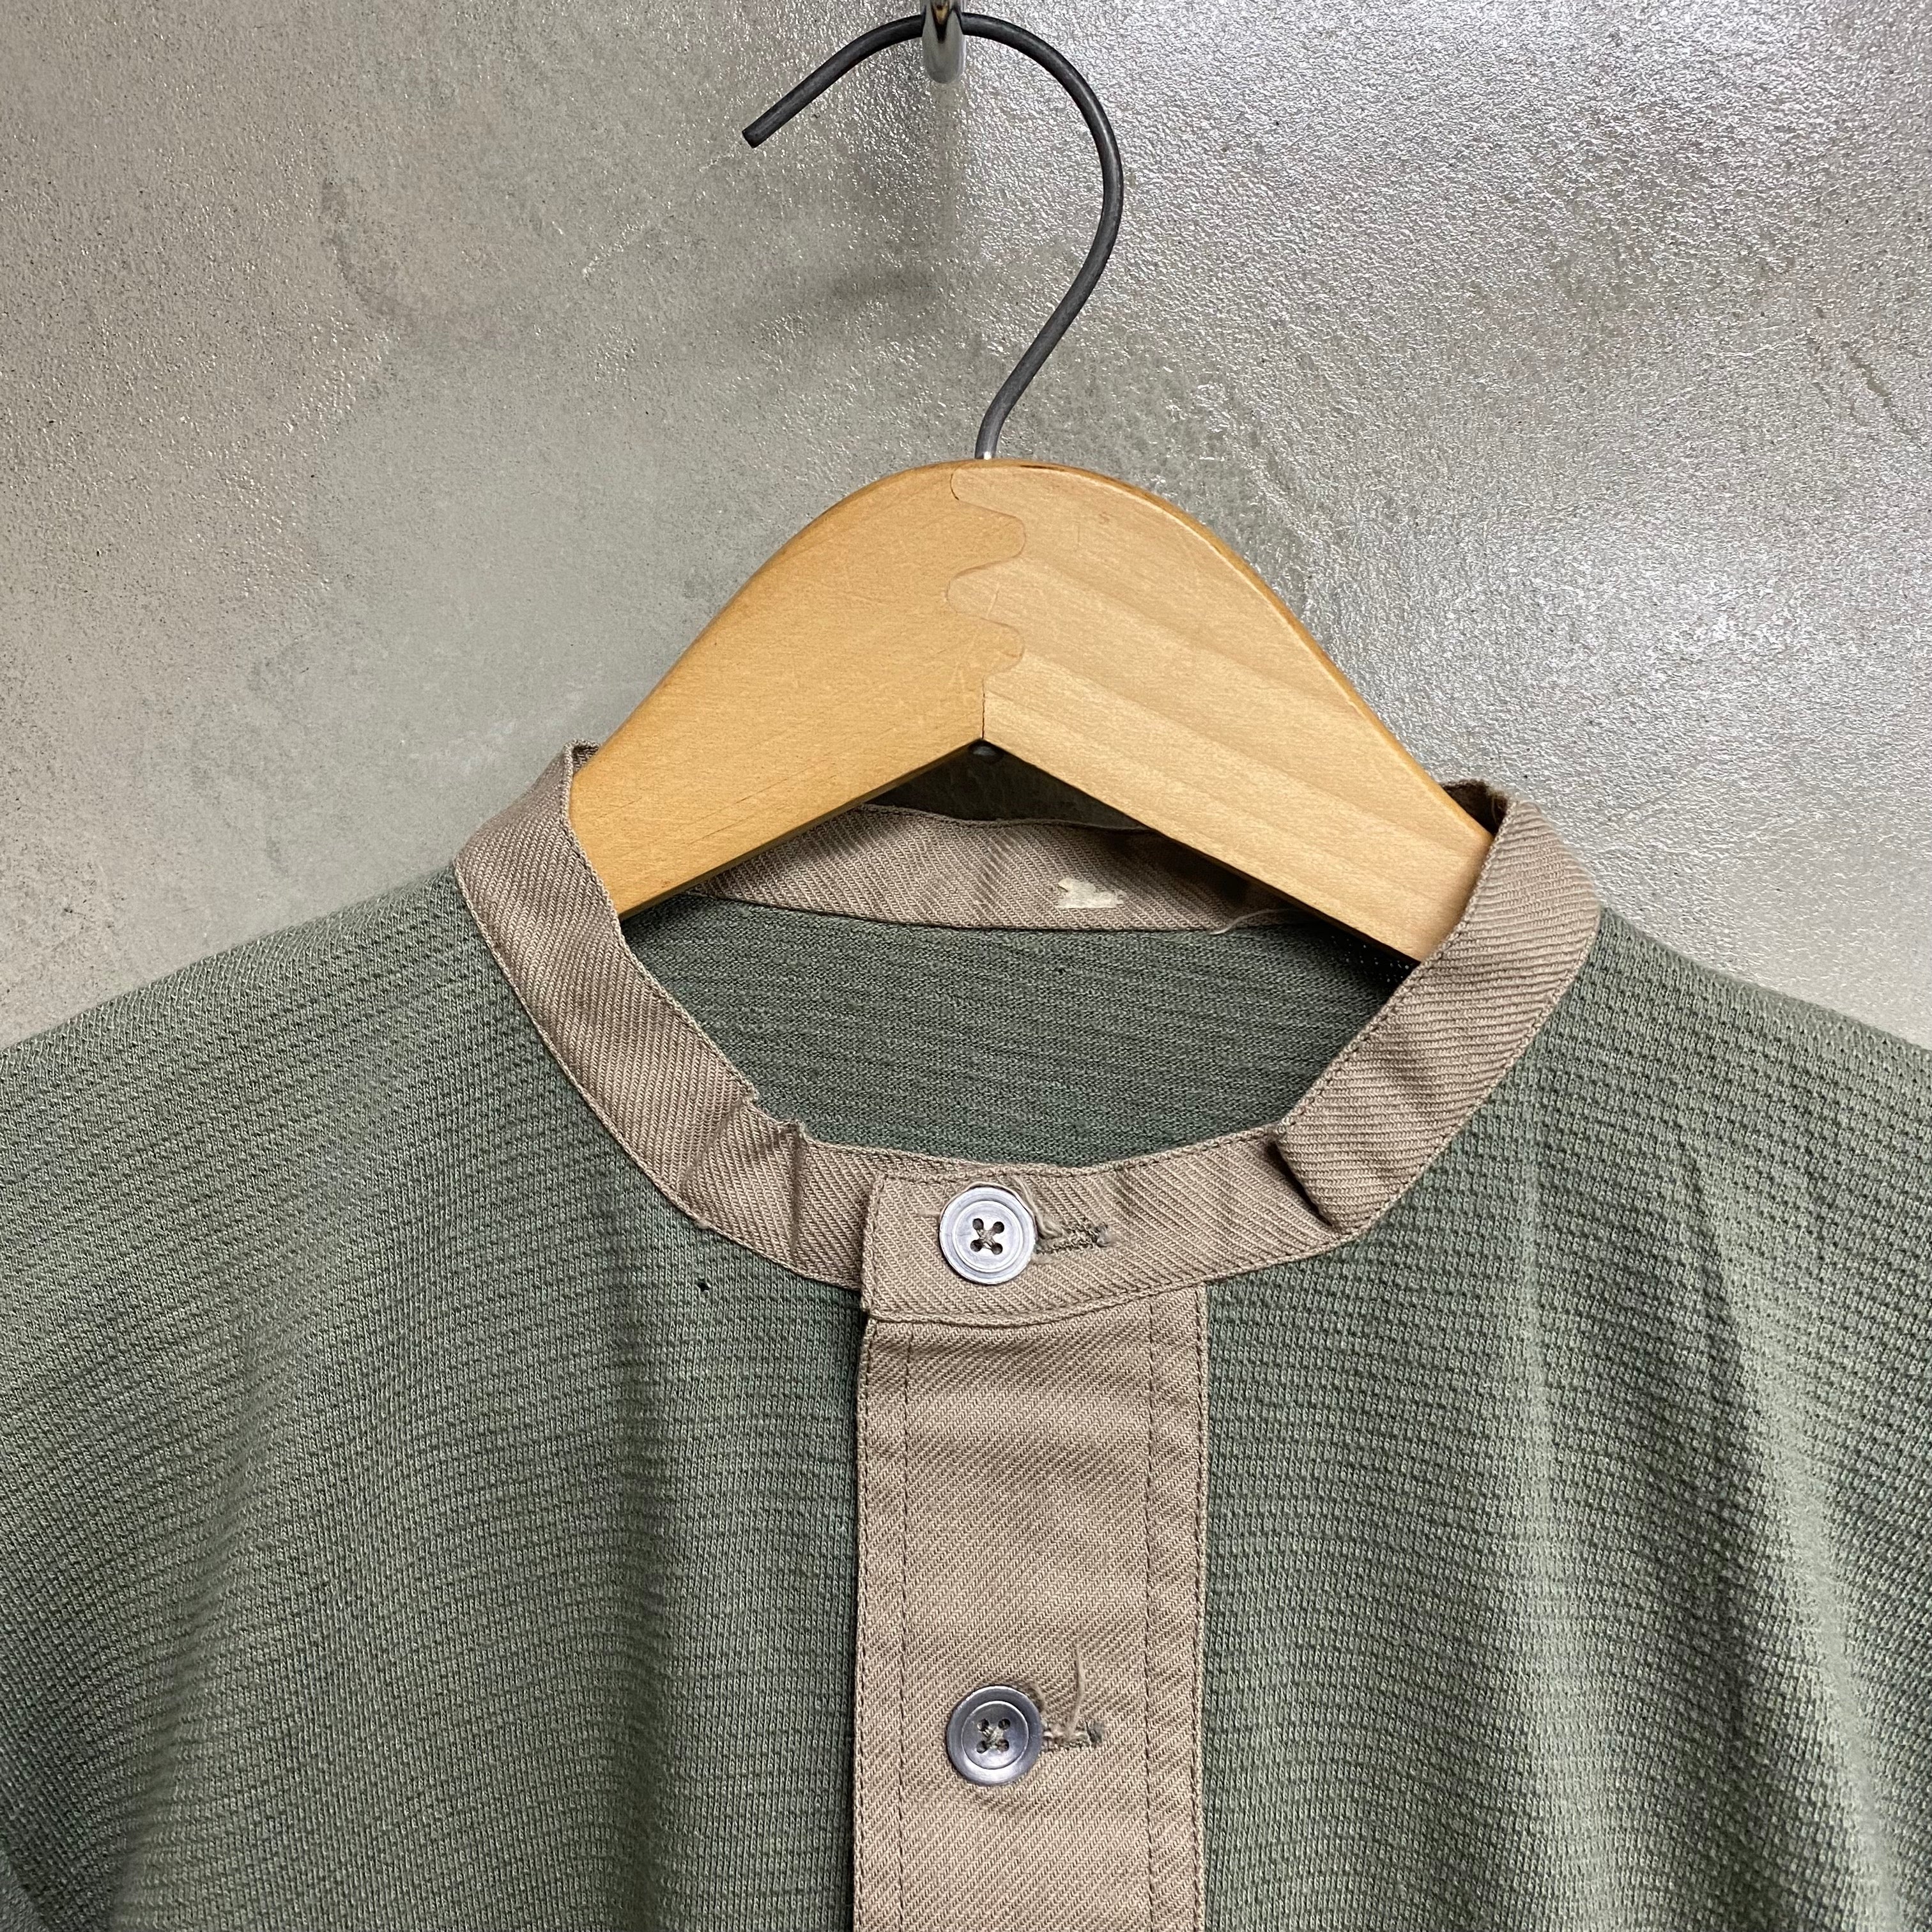 [ ONLY ONE ! ] SWEDISH MILITARY 40's LONG SLEEVE UNDERSHIRT  / Mr.Clean Select